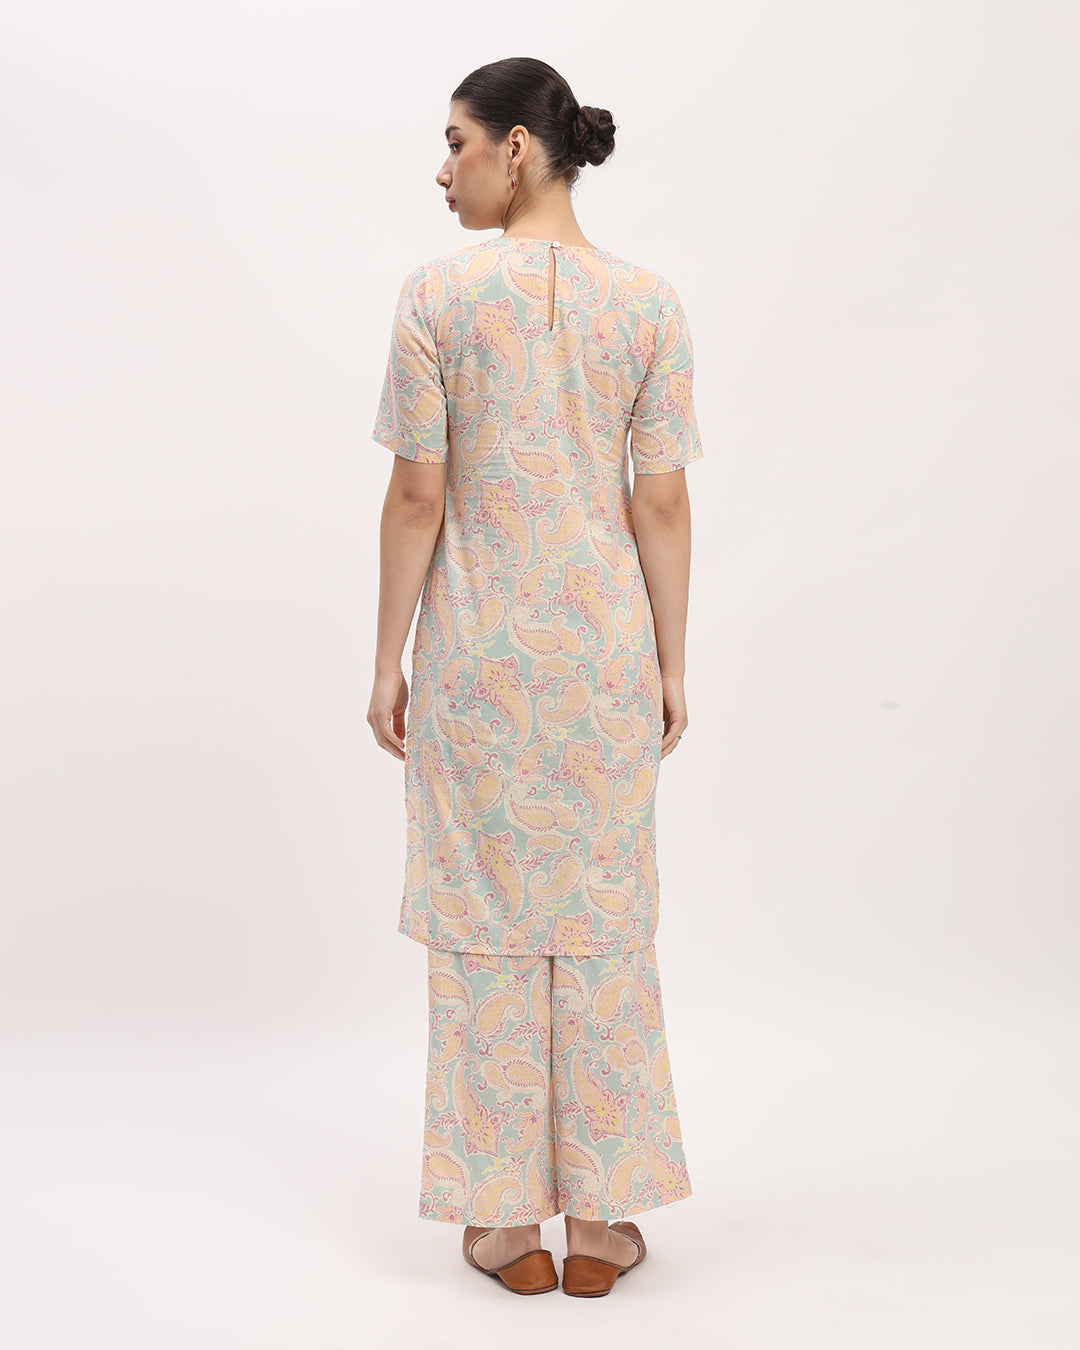 Tiffany Blue Paisely Round Neck Printed Kurta (Without Bottoms)